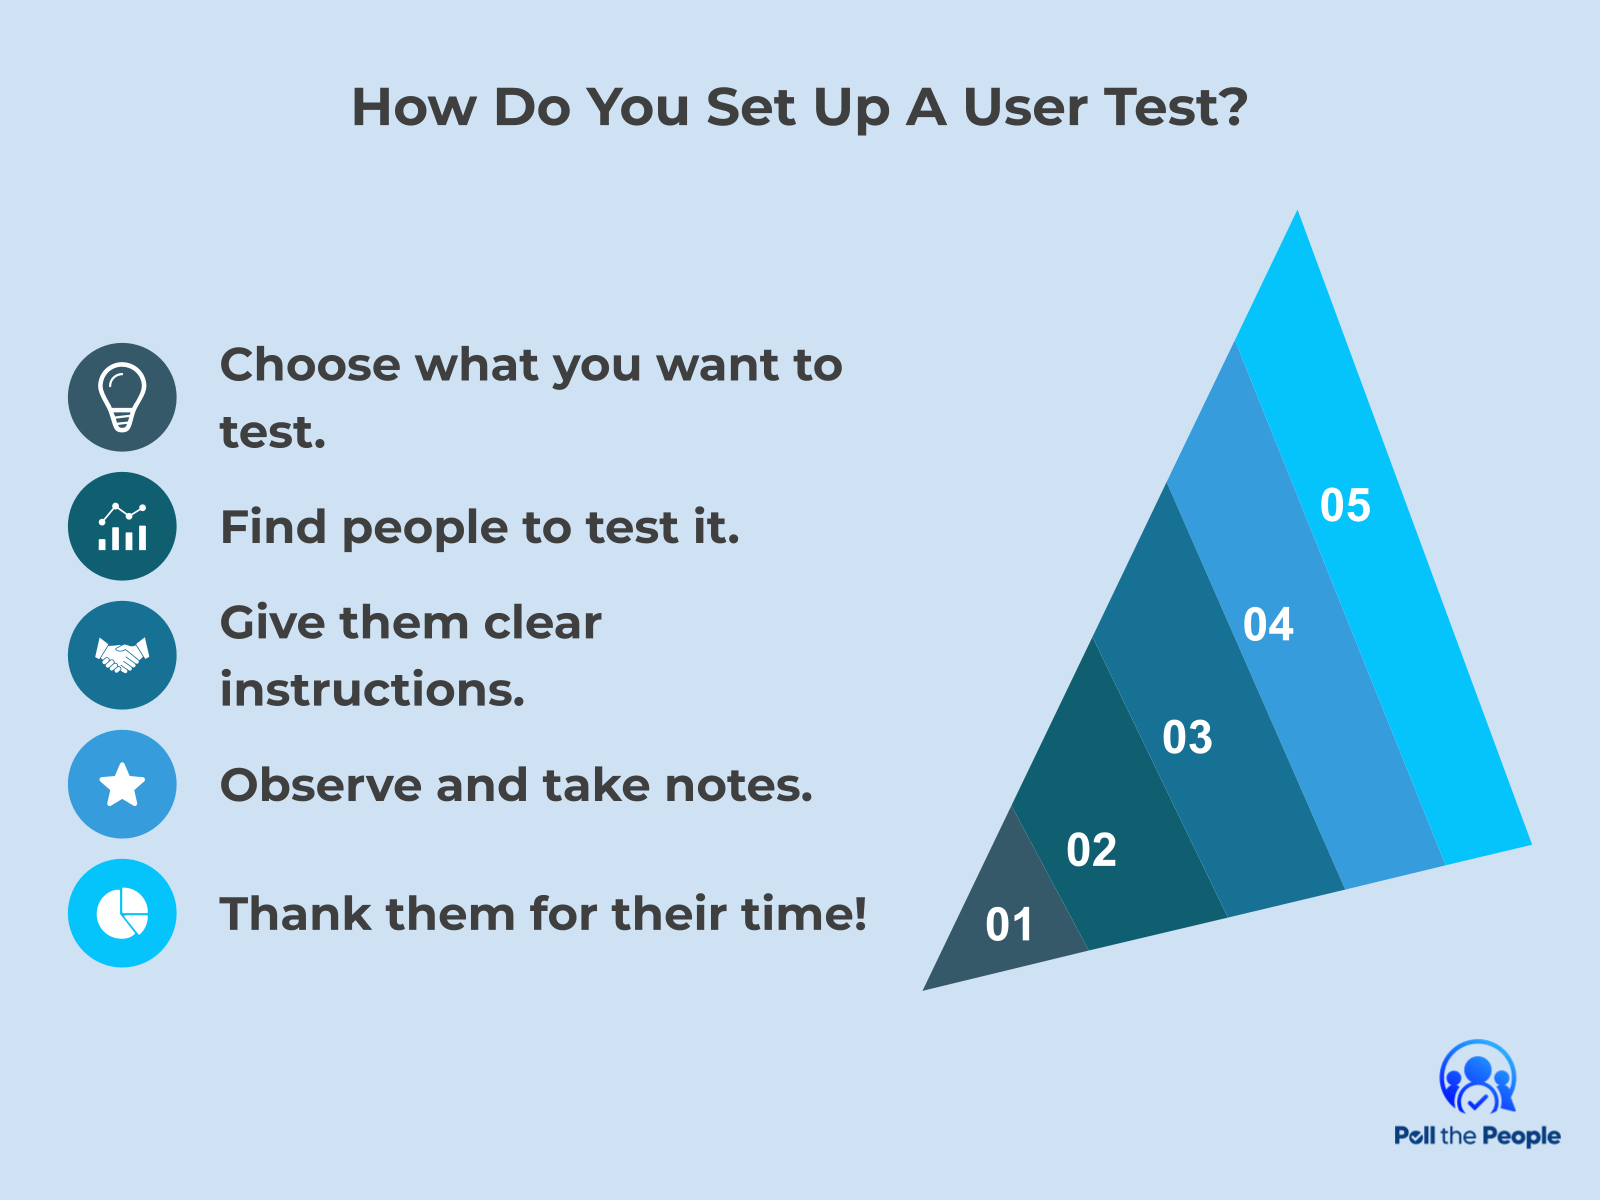 INFOGRAPHIC: How do you set up a user test? - Poll the People